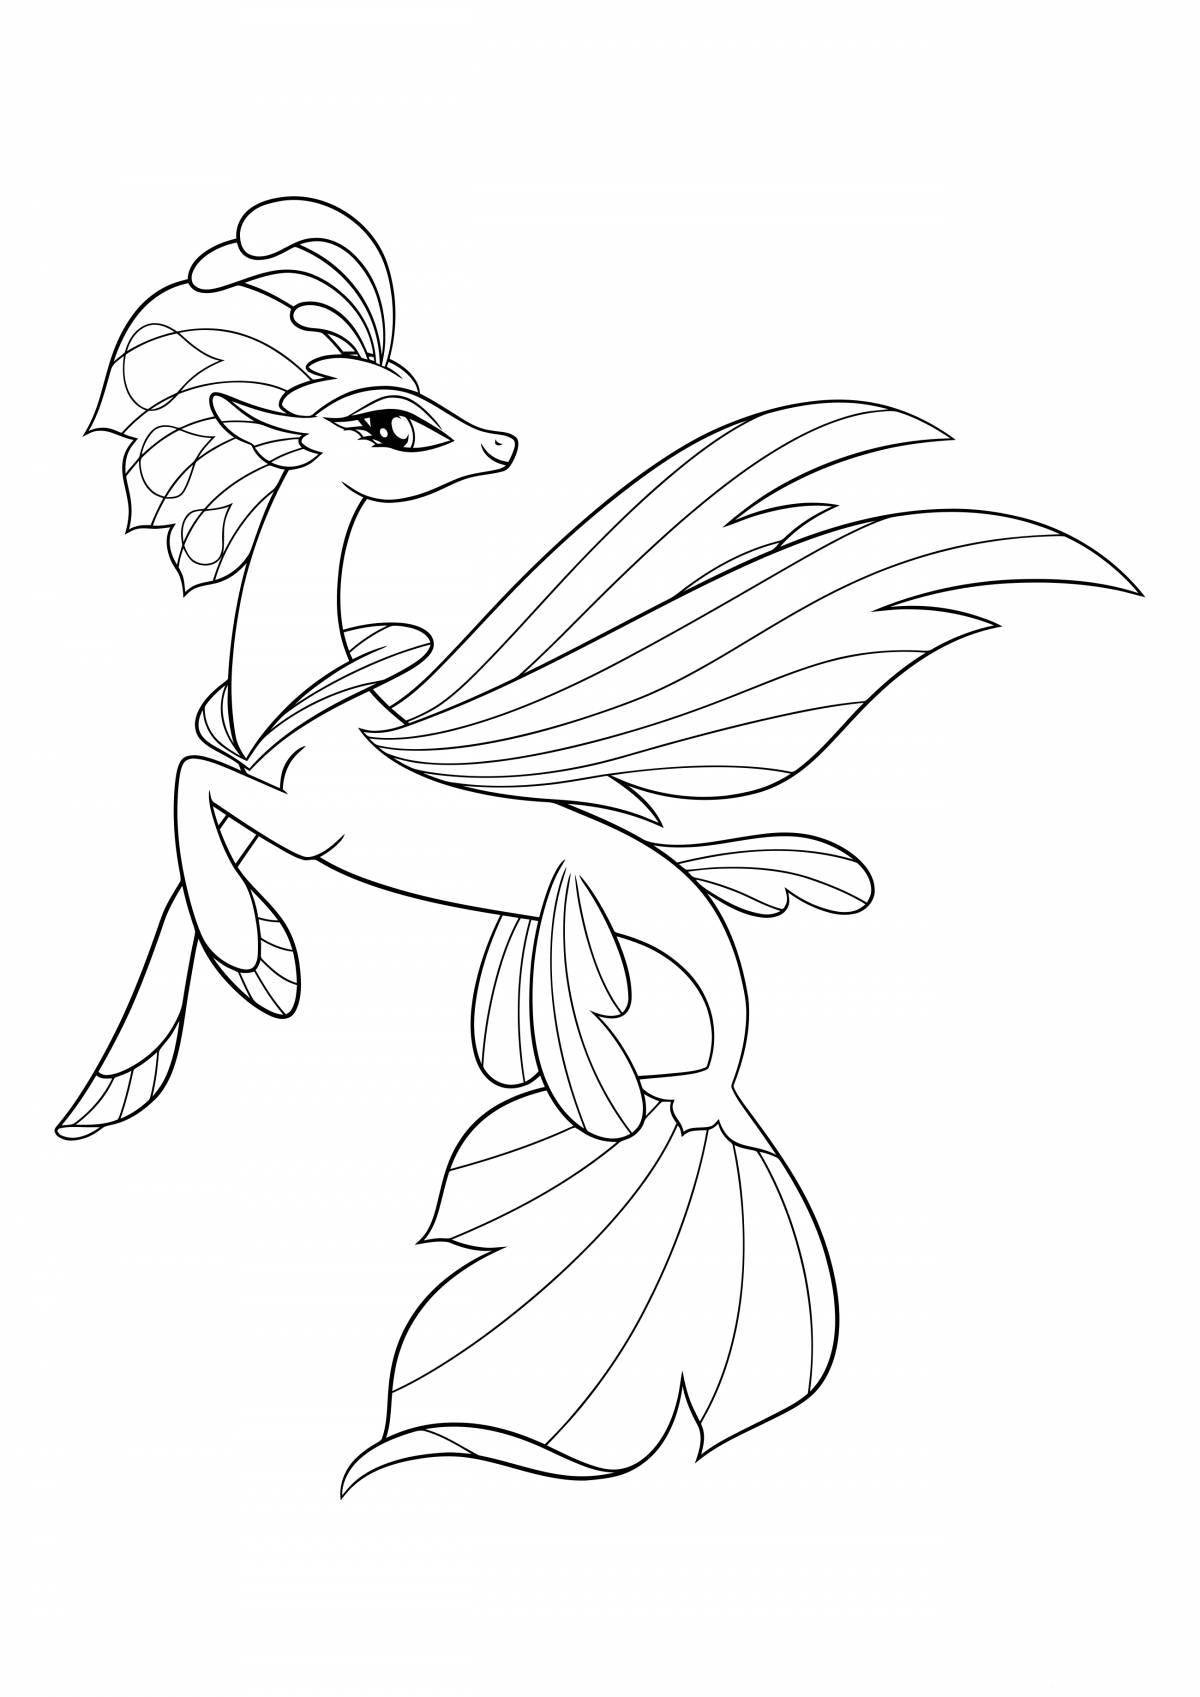 Generous hippogriff coloring book